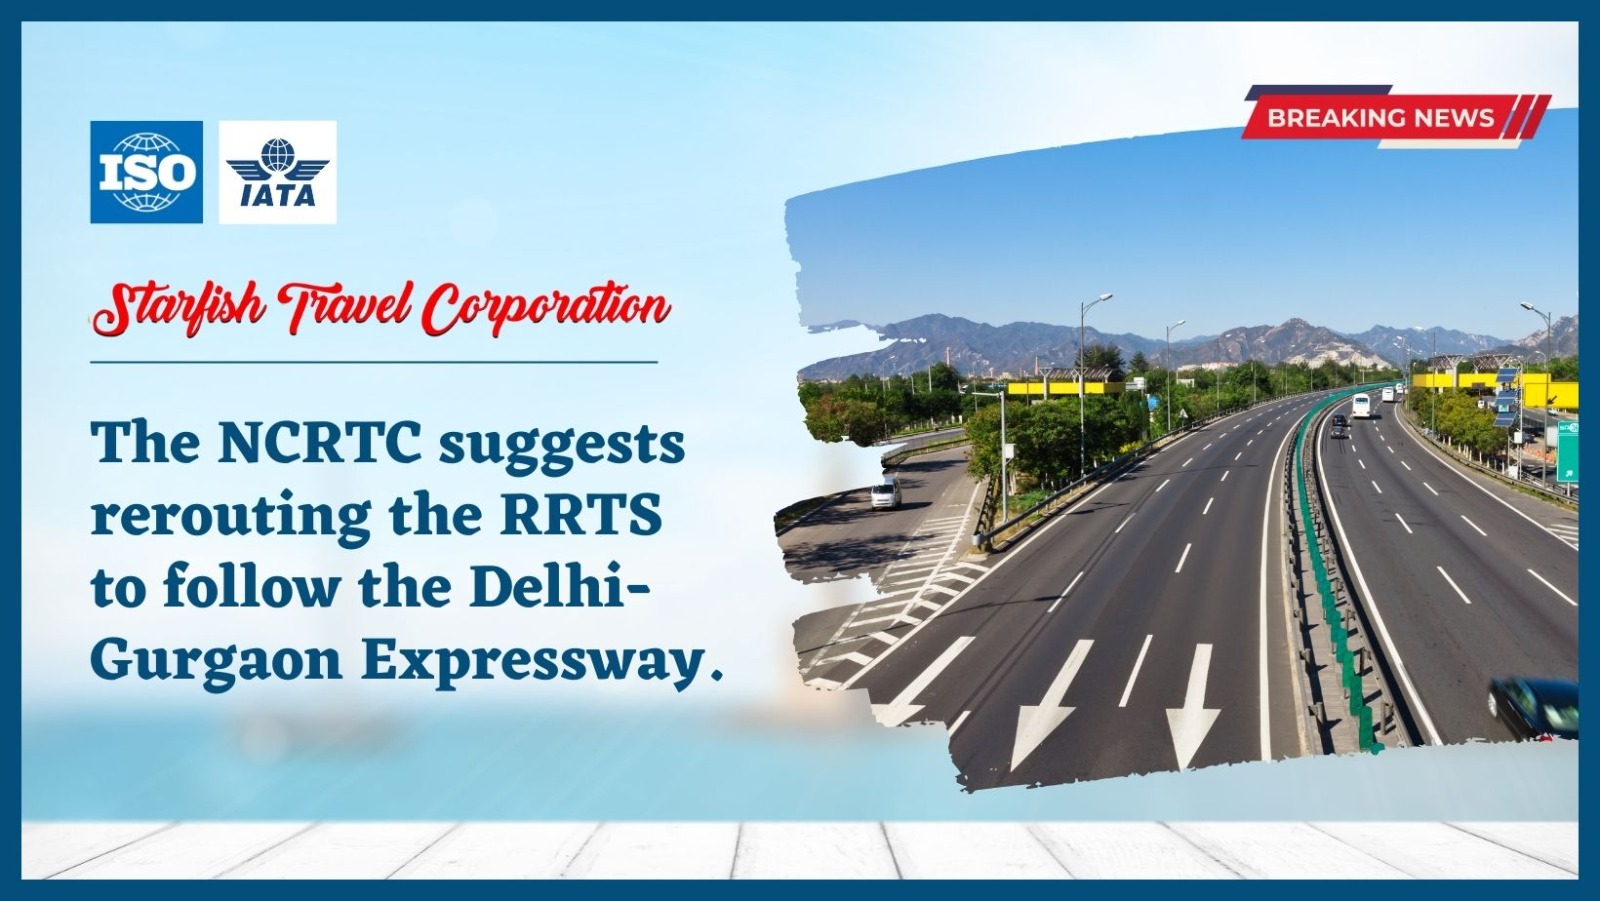 The NCRTC suggests rerouting the RRTS to follow the Delhi-Gurgaon Expressway.